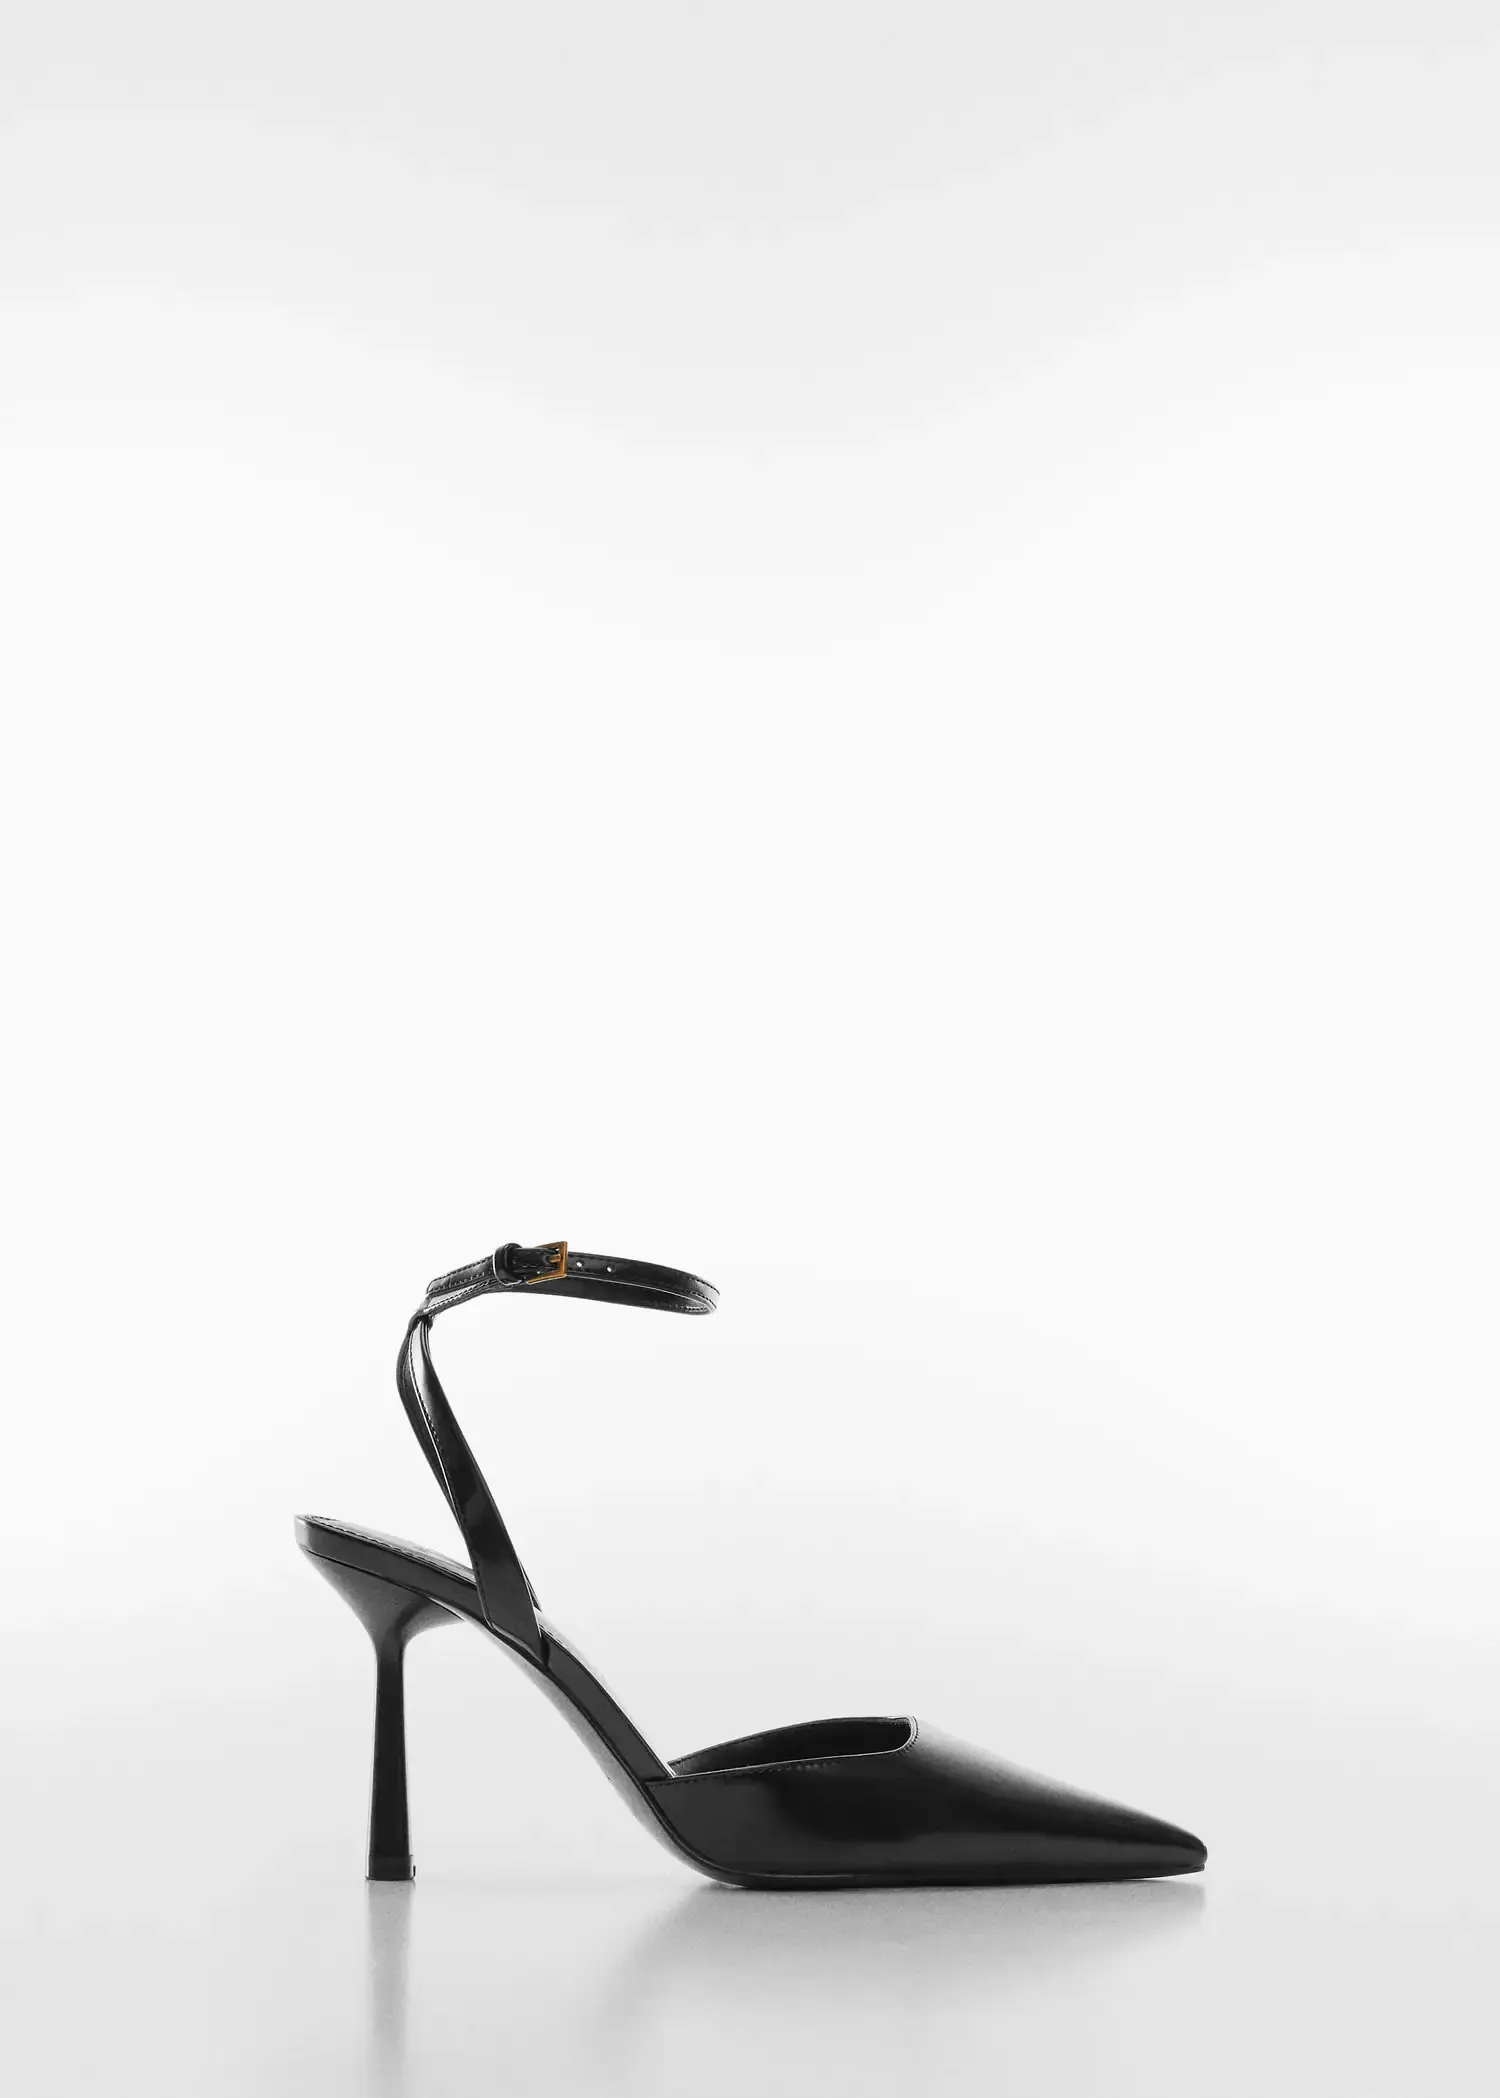 Mango High-heeled shoes. a pair of black high heeled shoes on a white background. 